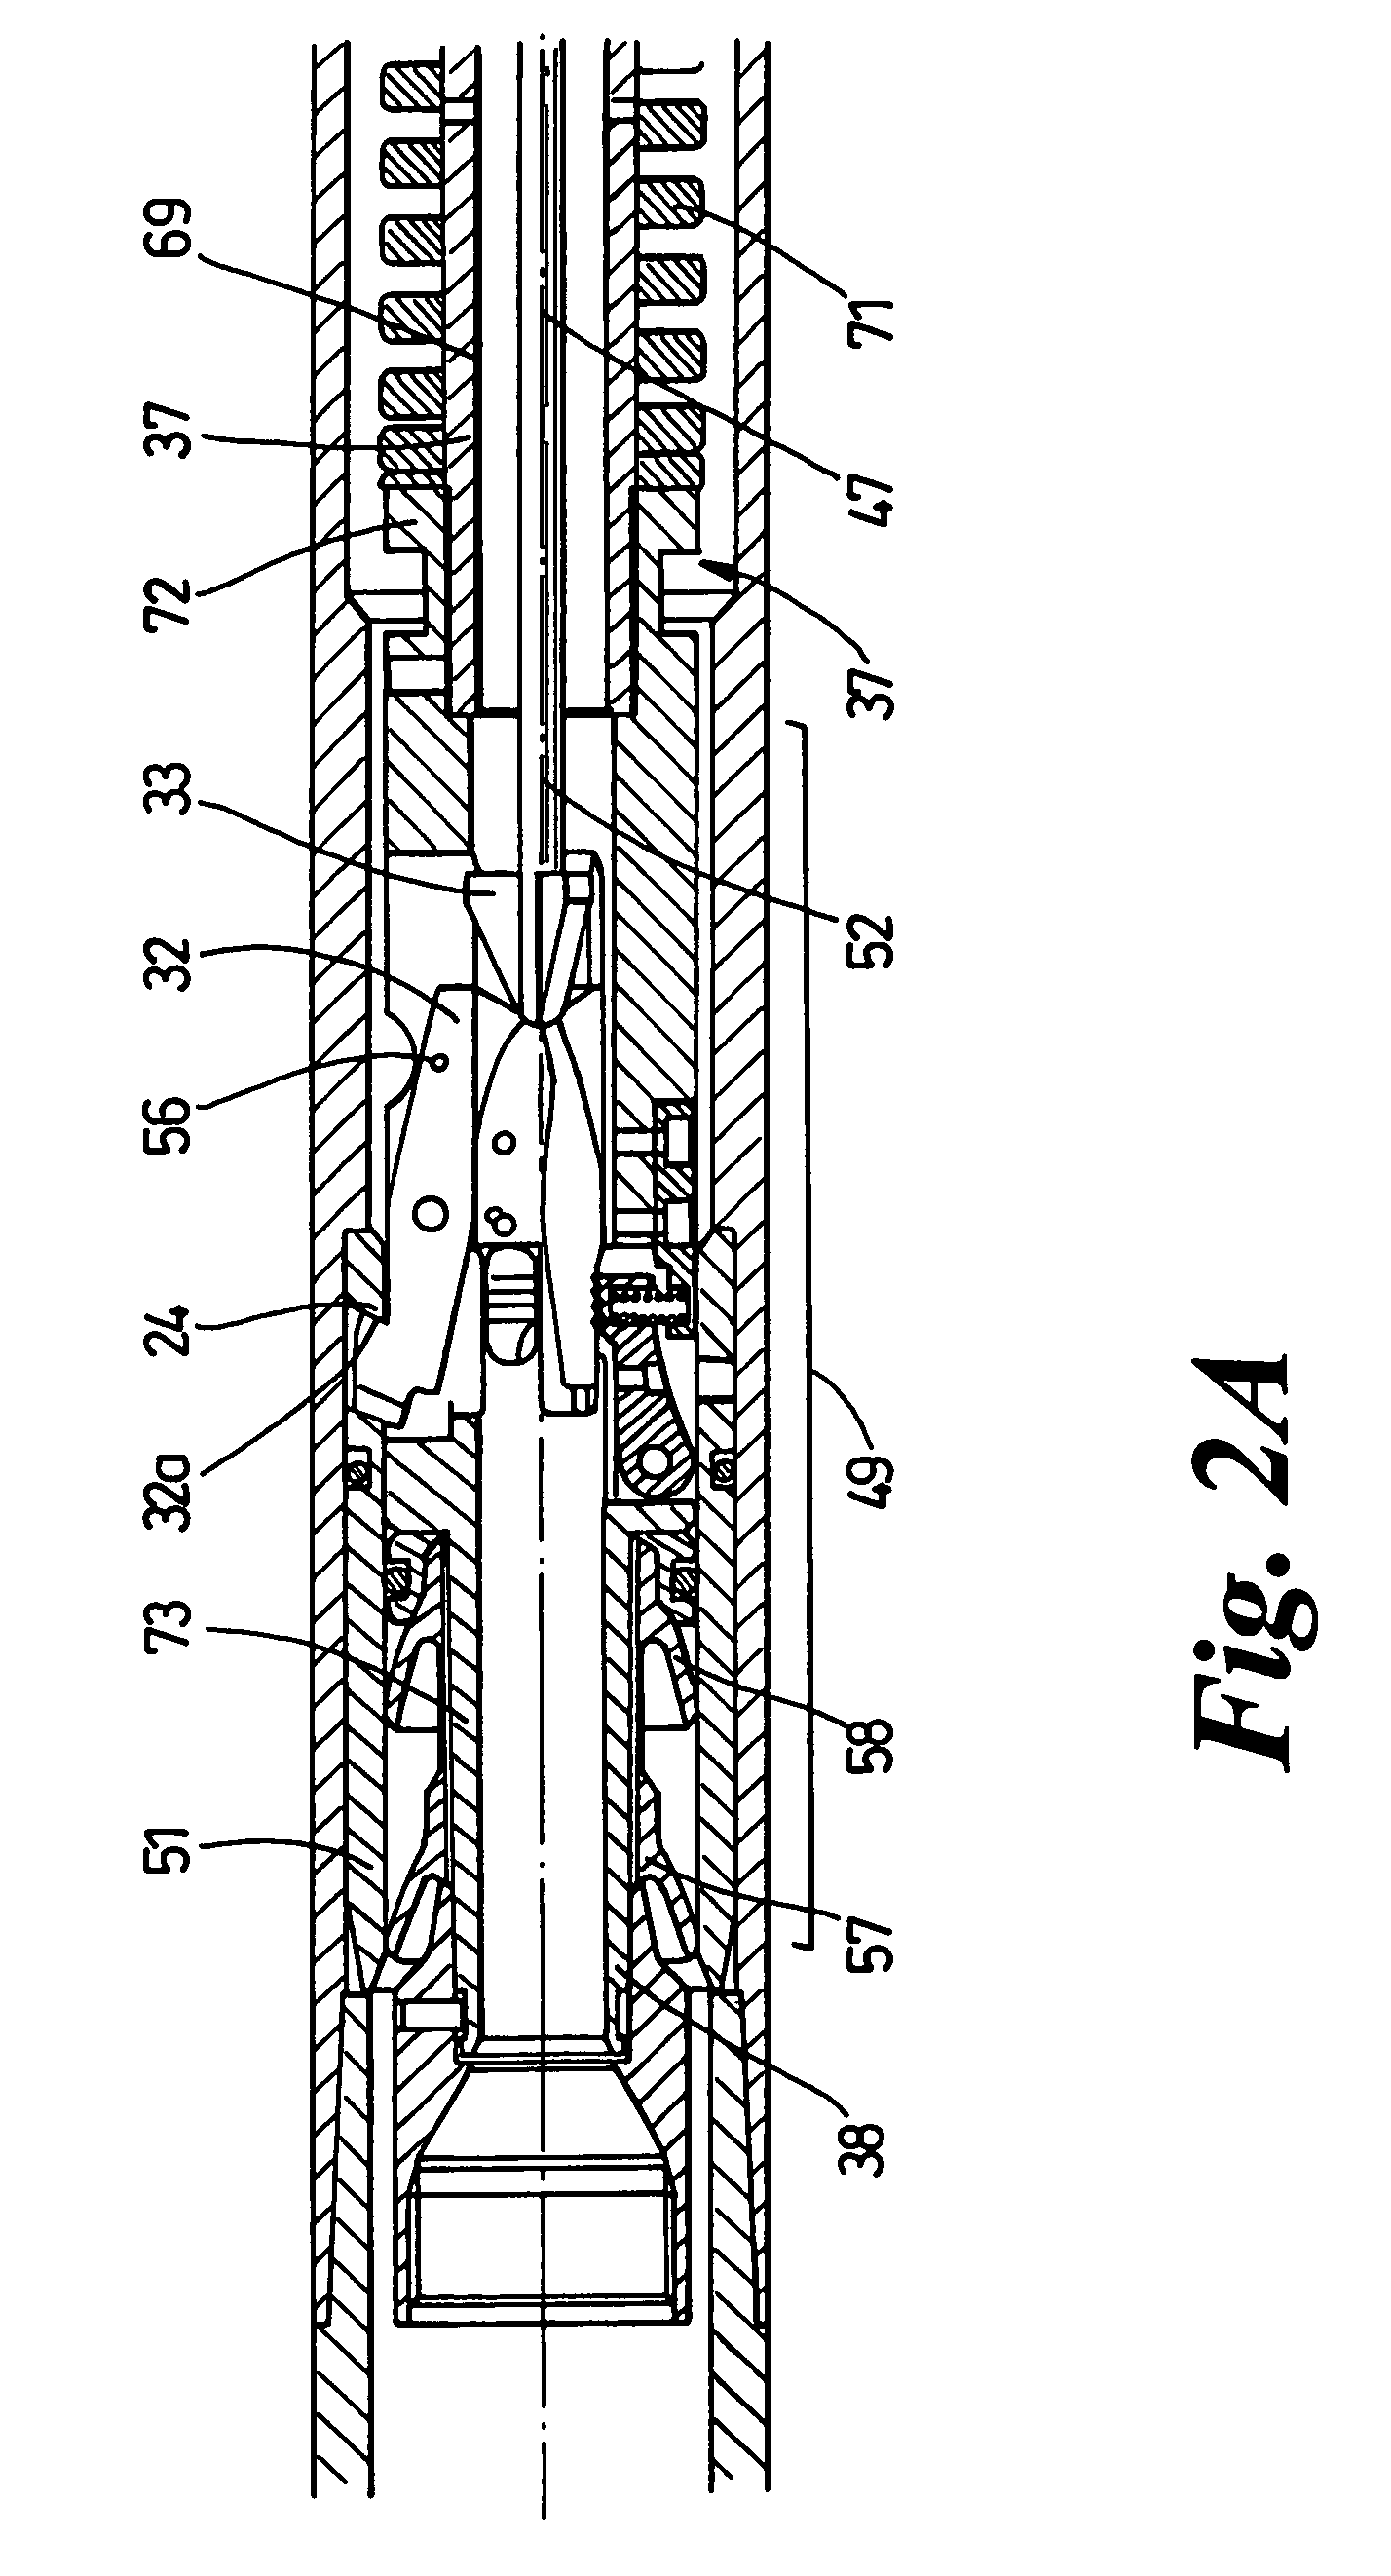 Apparatuses and methods for deploying logging tools and signalling in boreholes